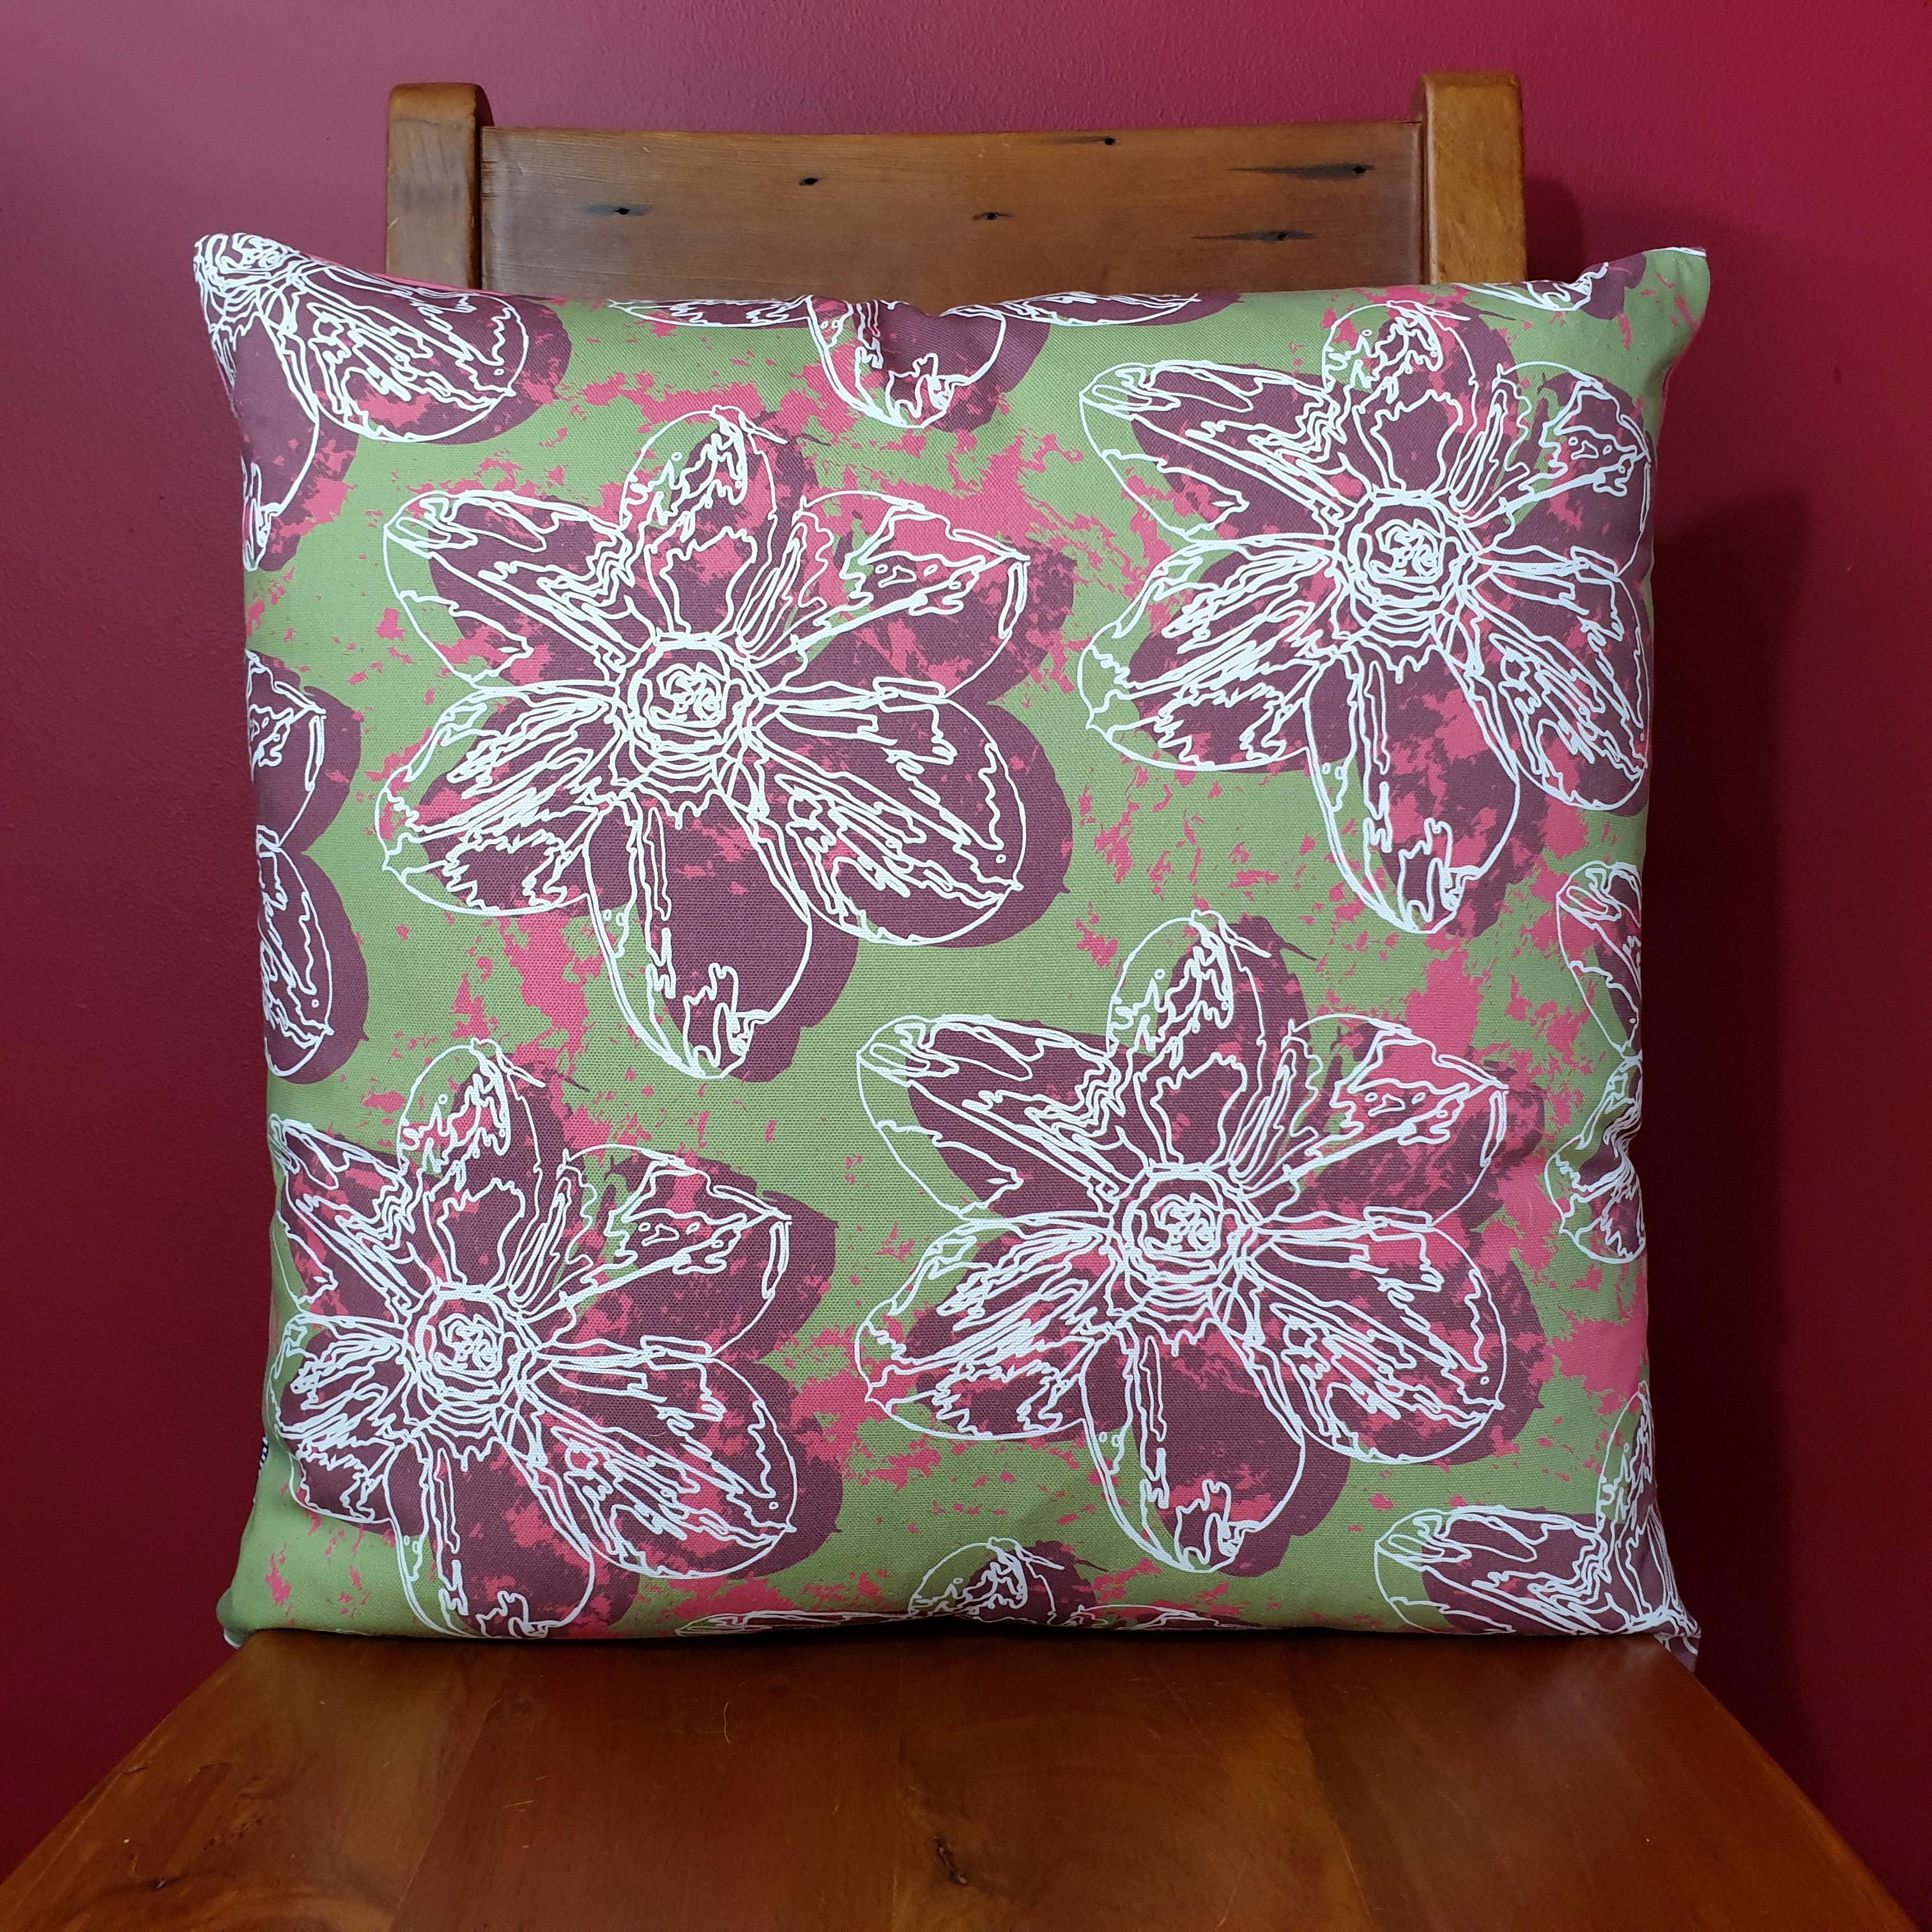 Double-sided 51cm square Flower Splash cushion designed by thetinkan. Dark red narcissus flower with white traced outline set within an olive green background with salmon pink paint splashes. Available with an optional luxury cushion inner pad. VIEW PRODUCT >>